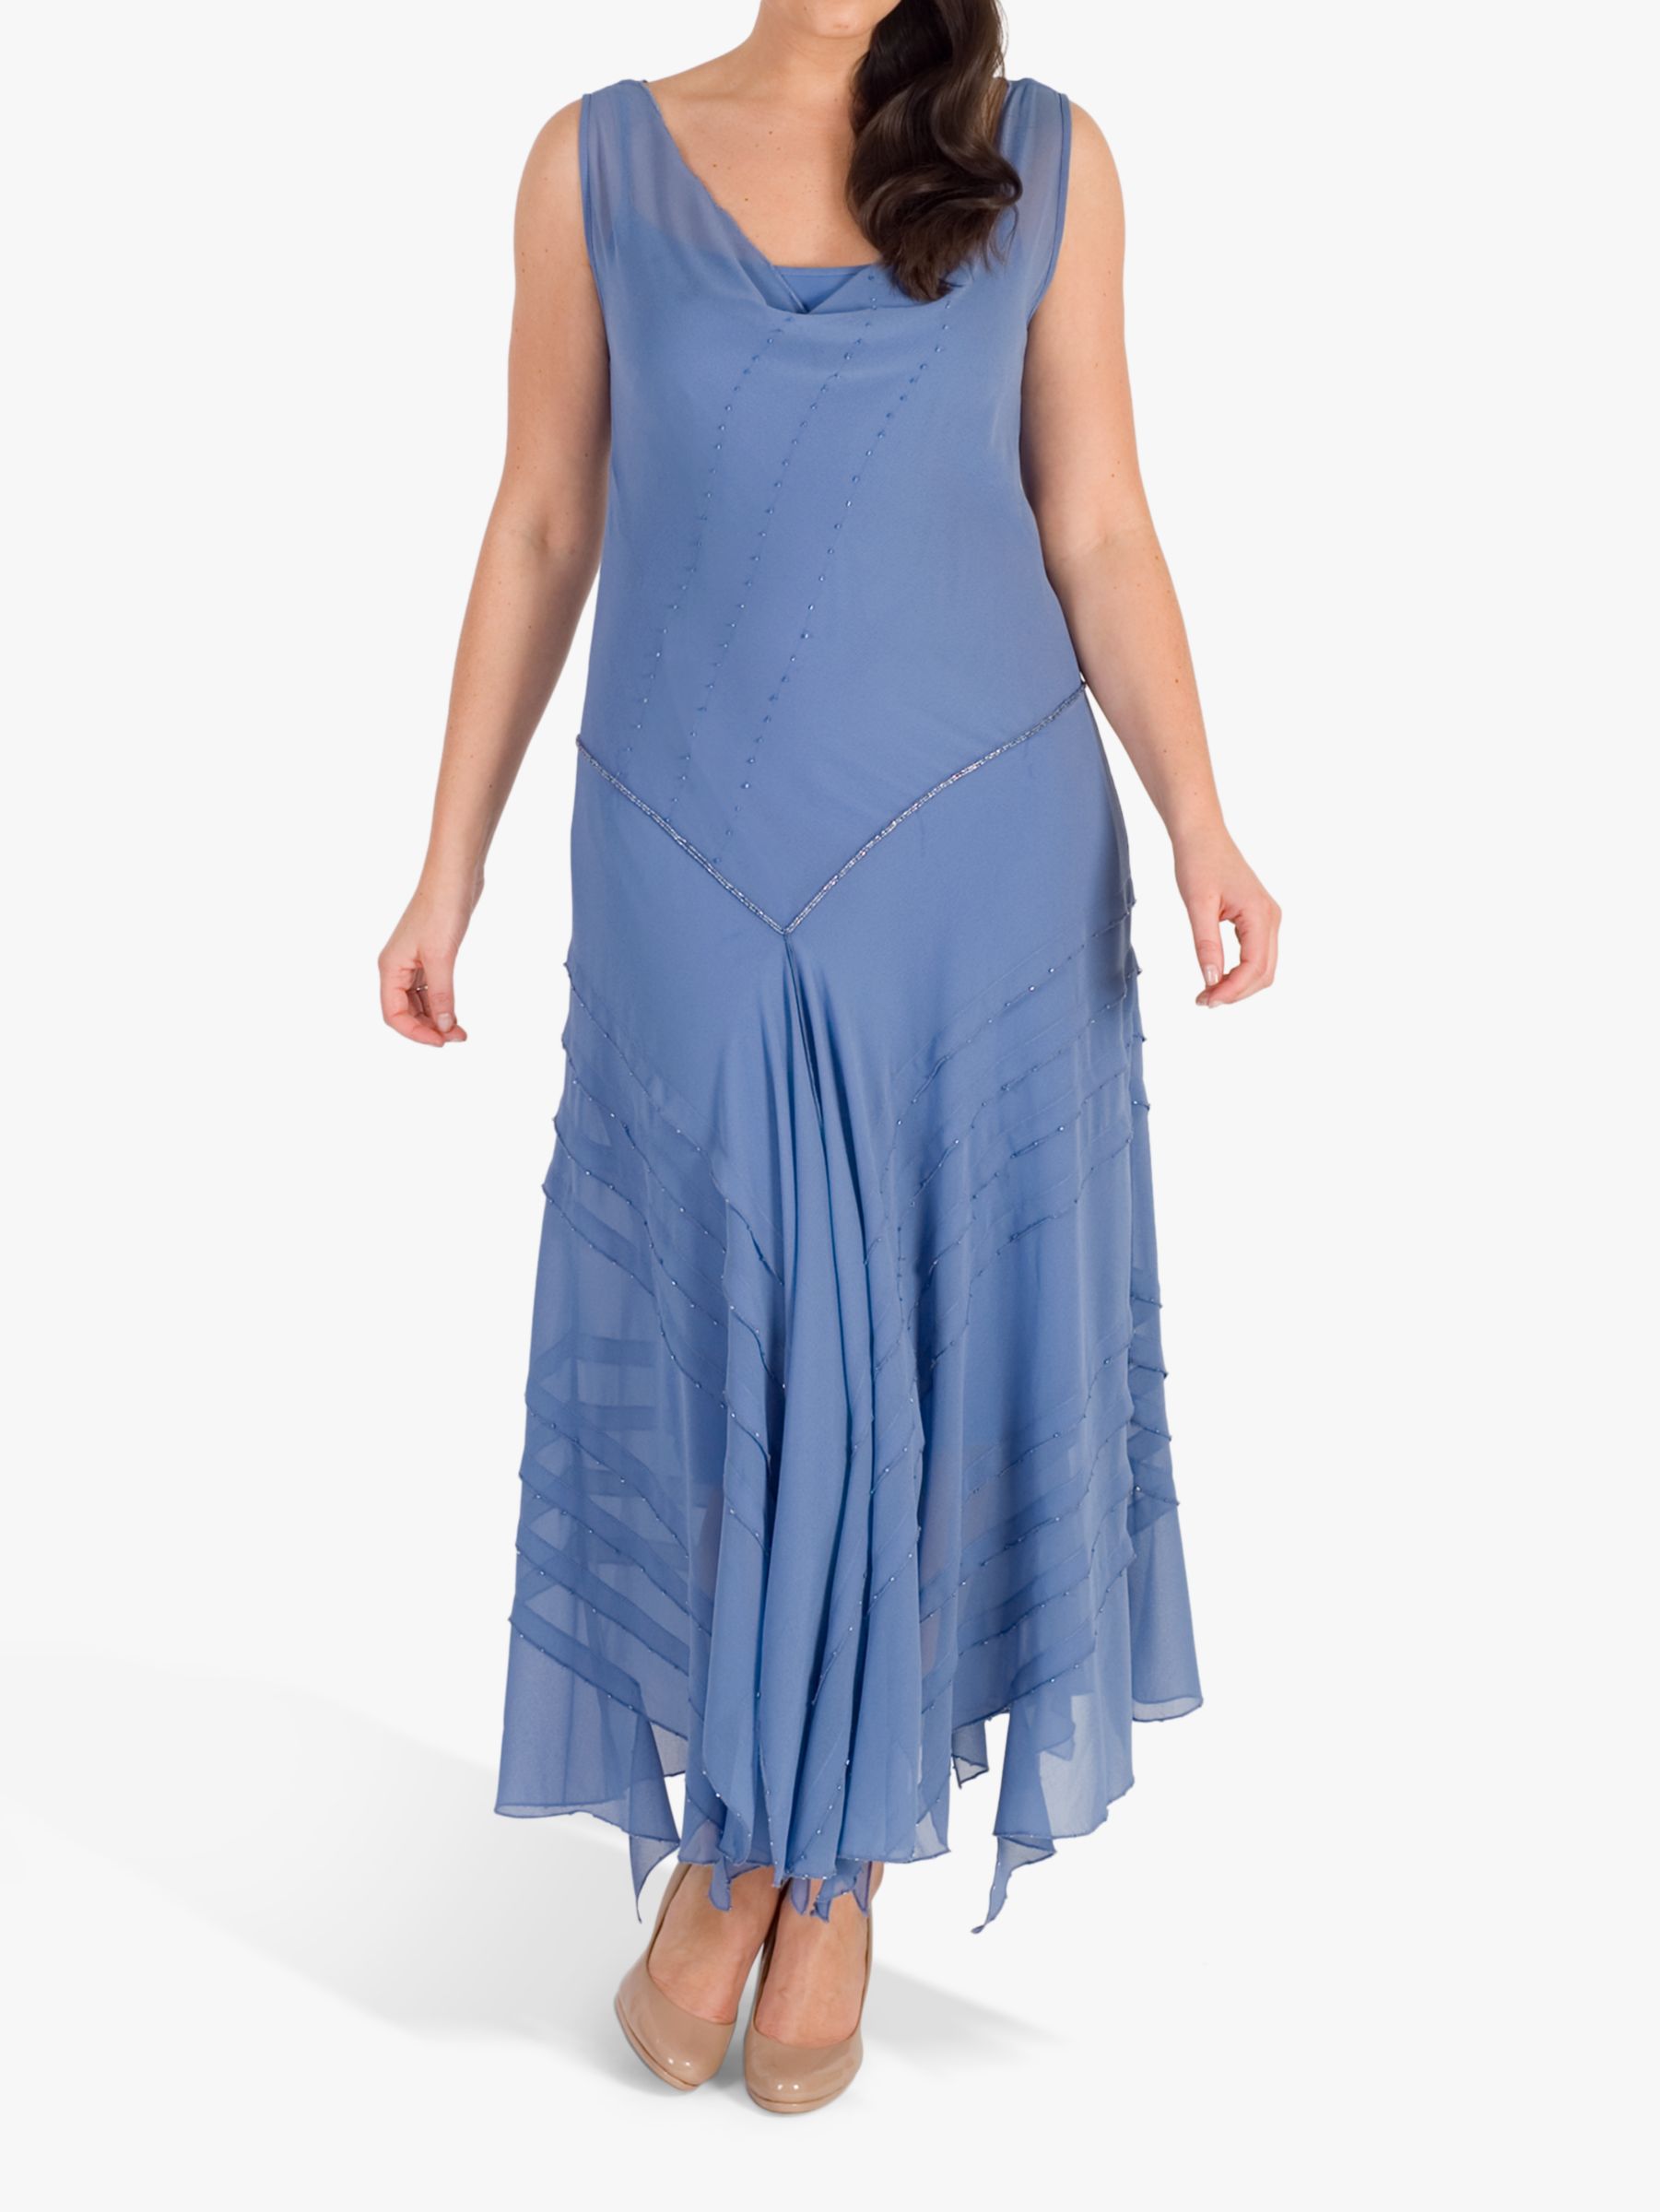 Chesca Beaded Cowl Neck Dress, Bluebell at John Lewis & Partners